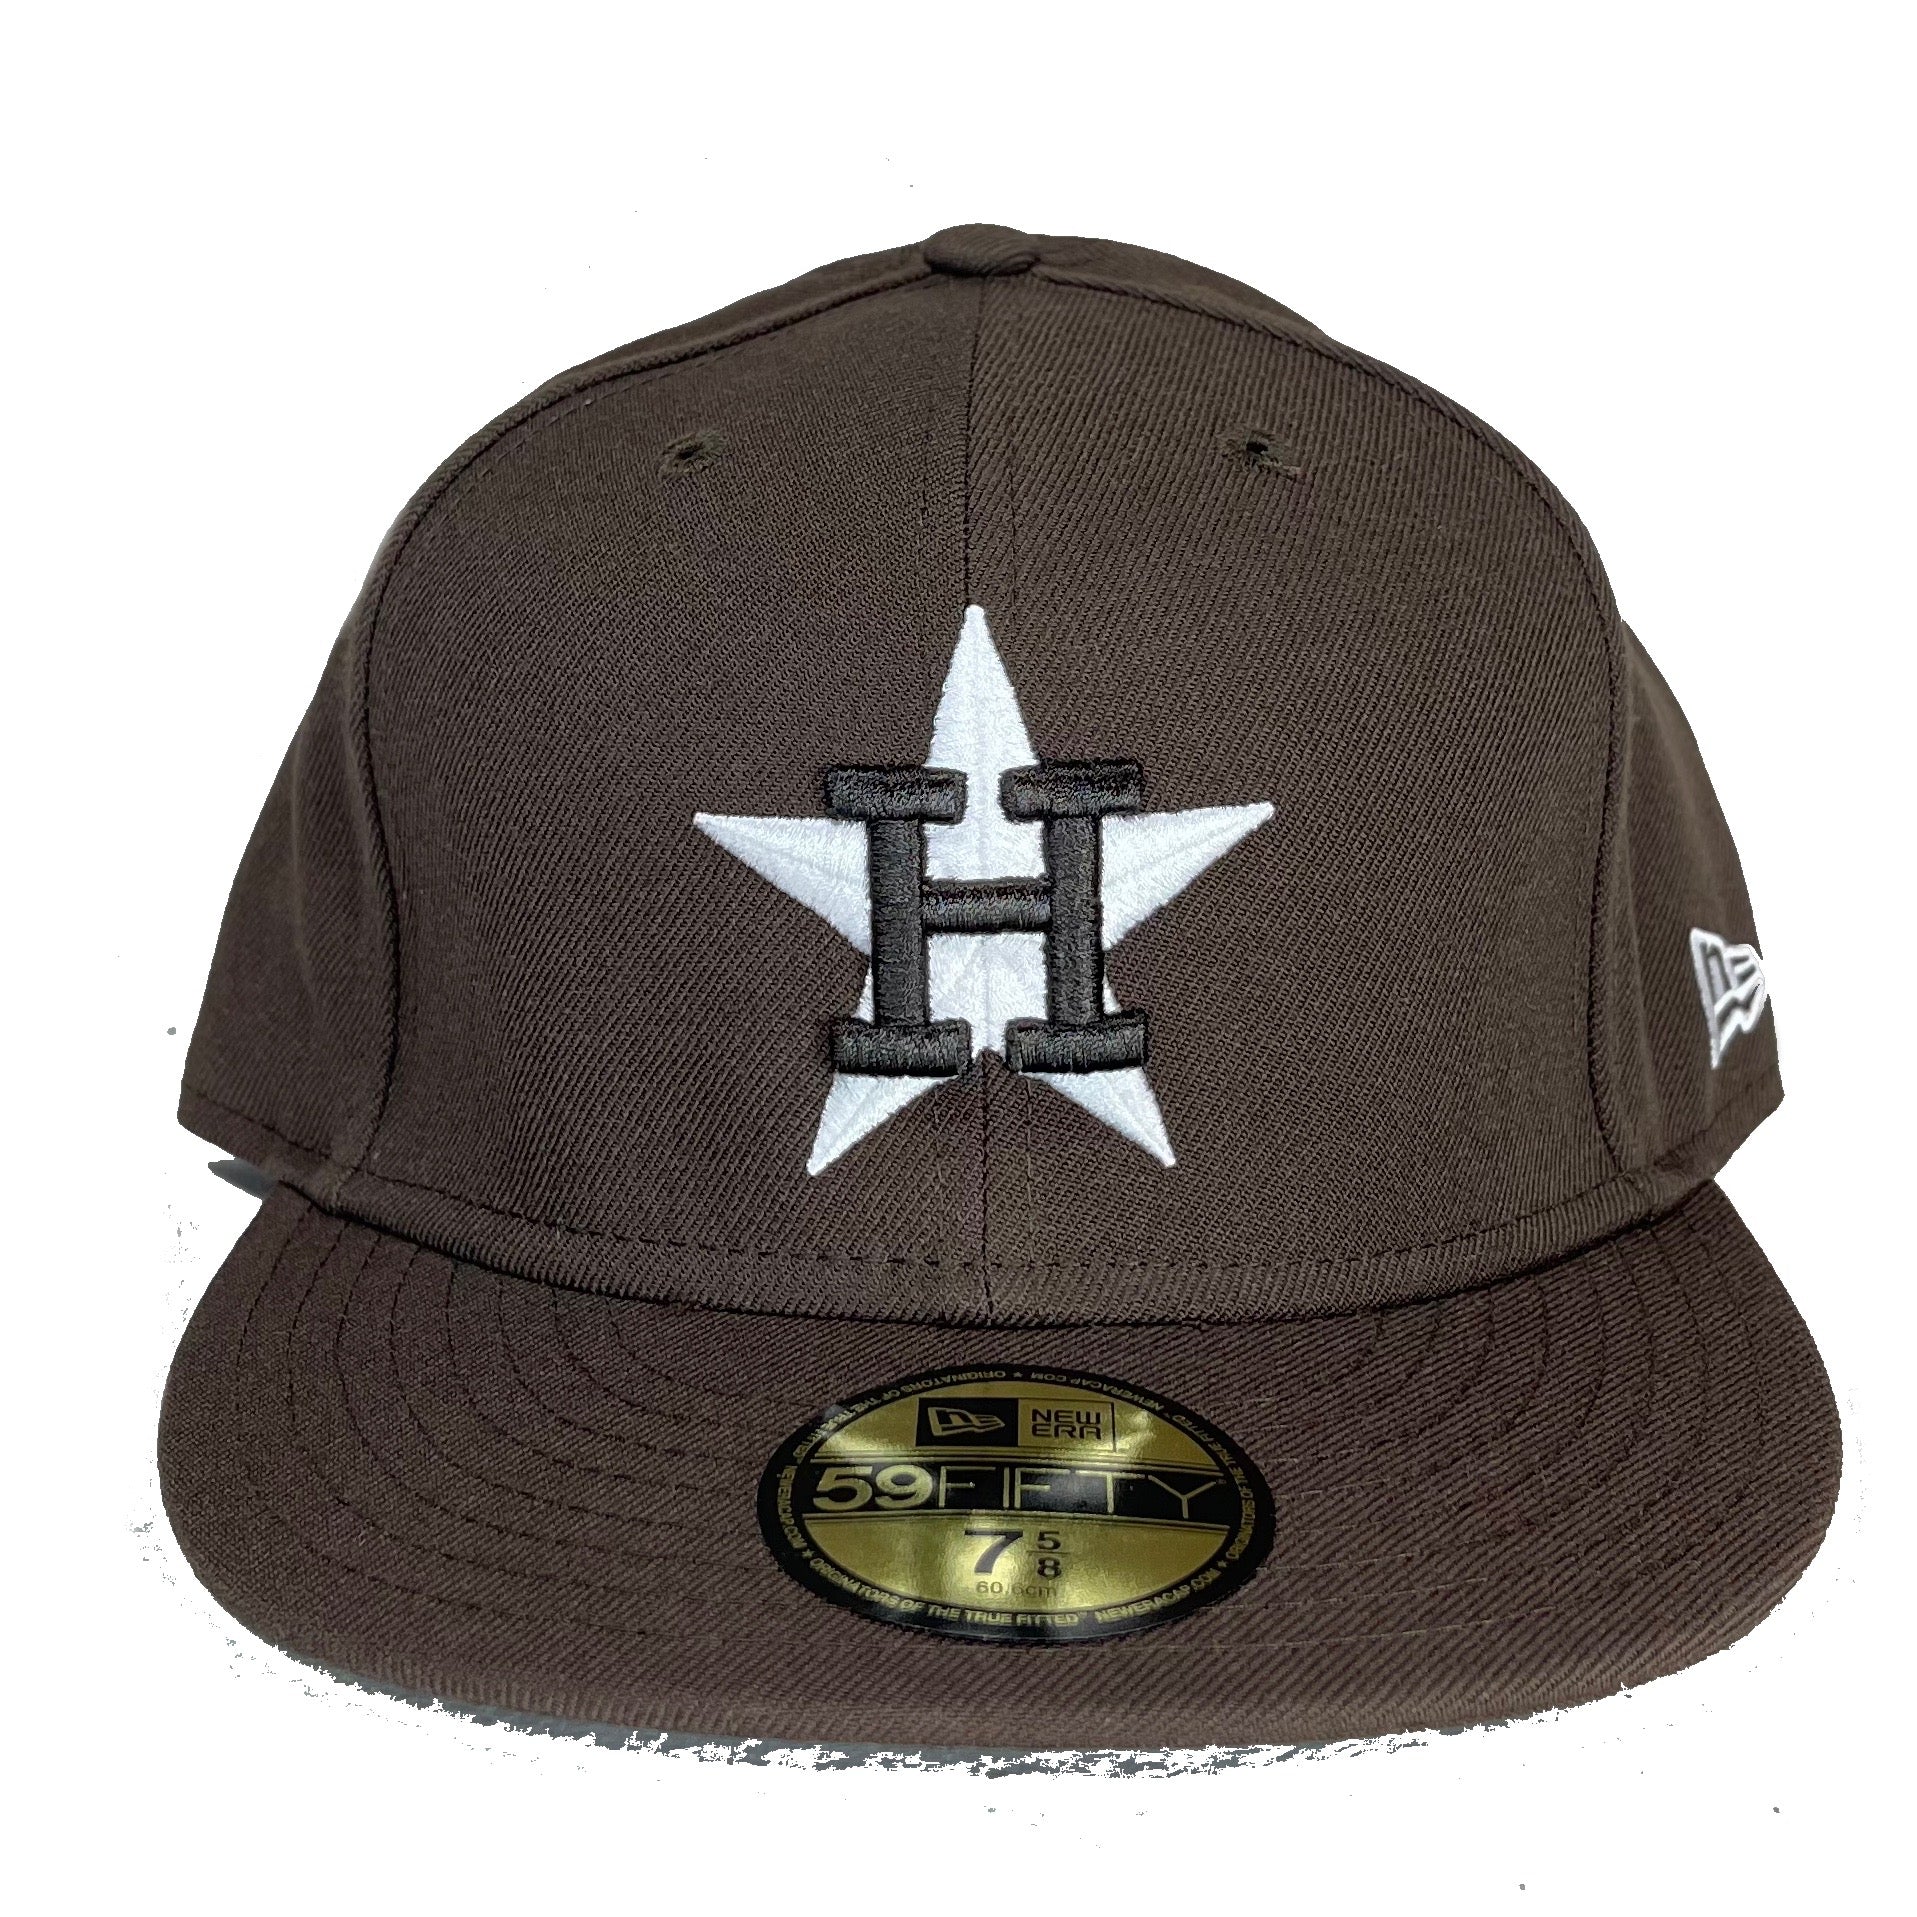 astros fitted hats